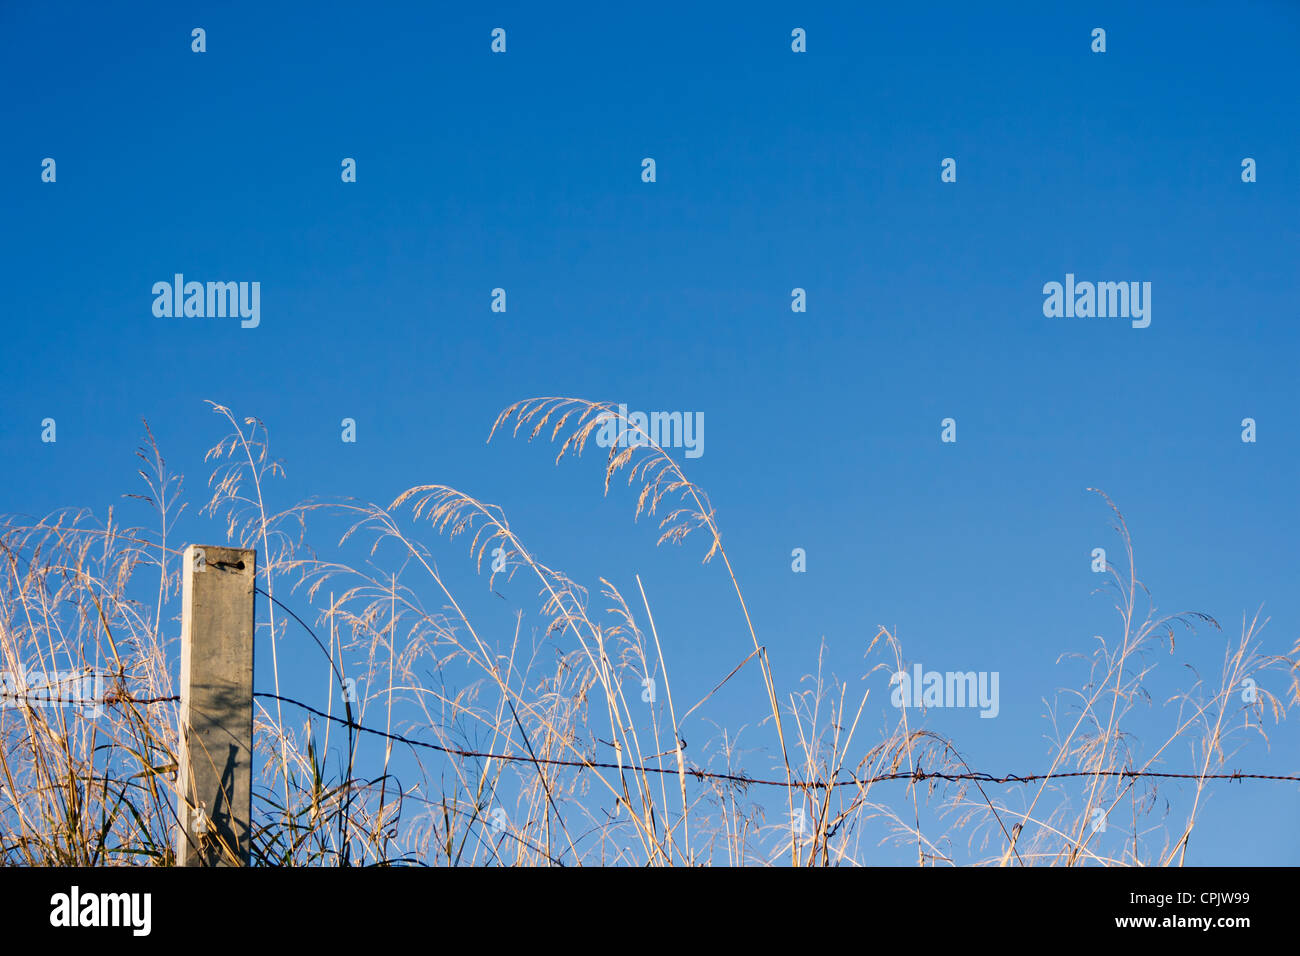 Grass blowing behind barbed wire fence against blue sky. Stock Photo